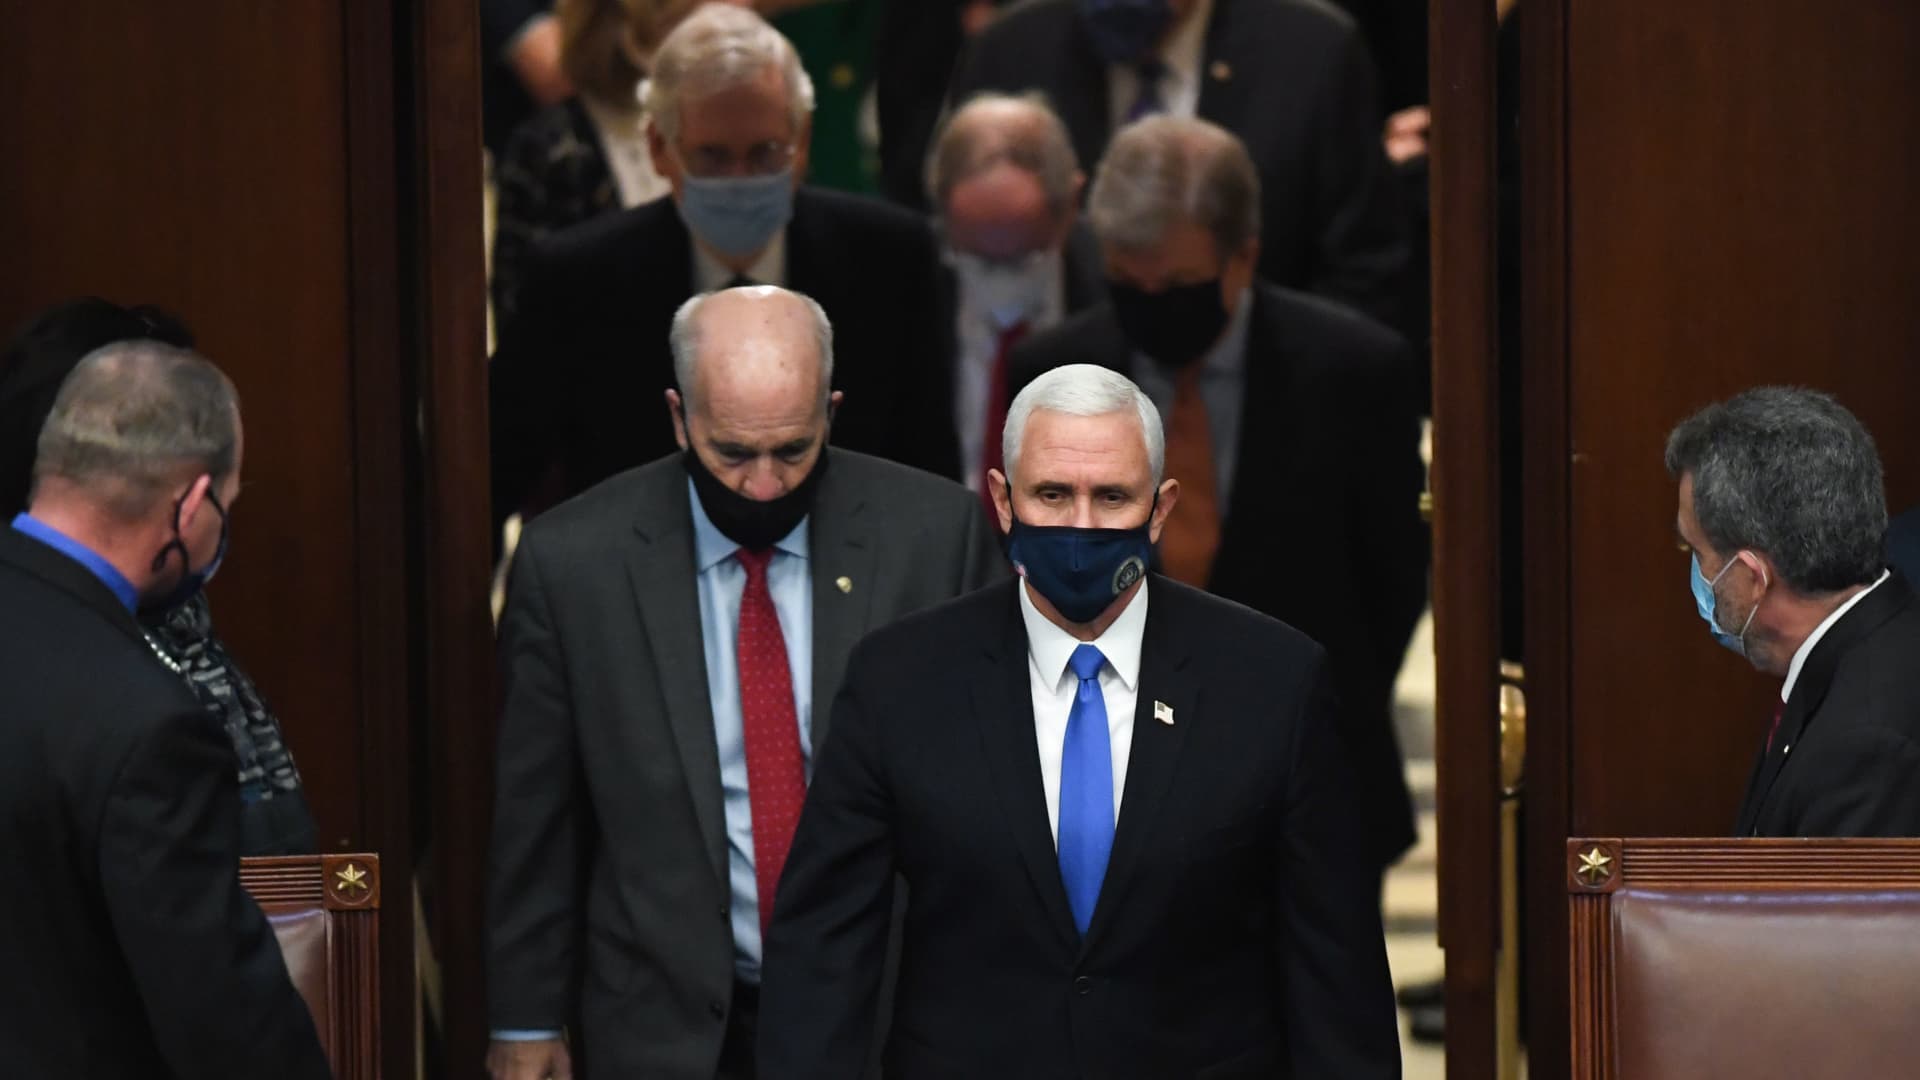 Vice President Mike Pence arrives to preside over a joint session of Congress at the U.S. Capitol in Washington, D.C., January 6, 2021.